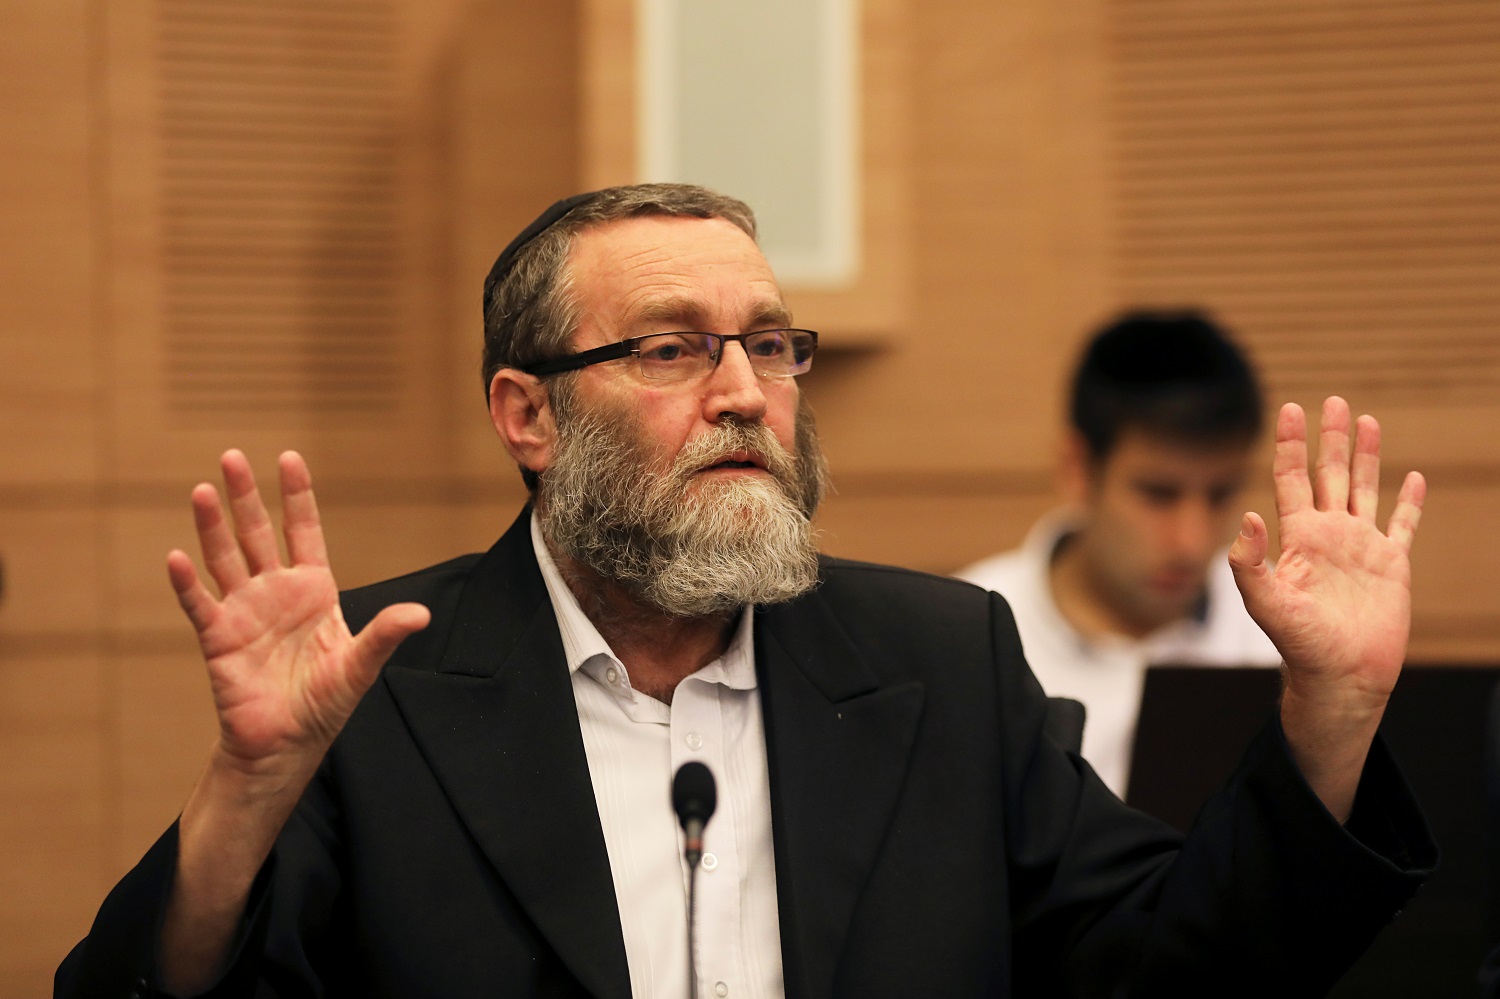 Moshe Gafni, pictured here in 2017, has been a member of the Knesset for more than 30 years (Reuters)